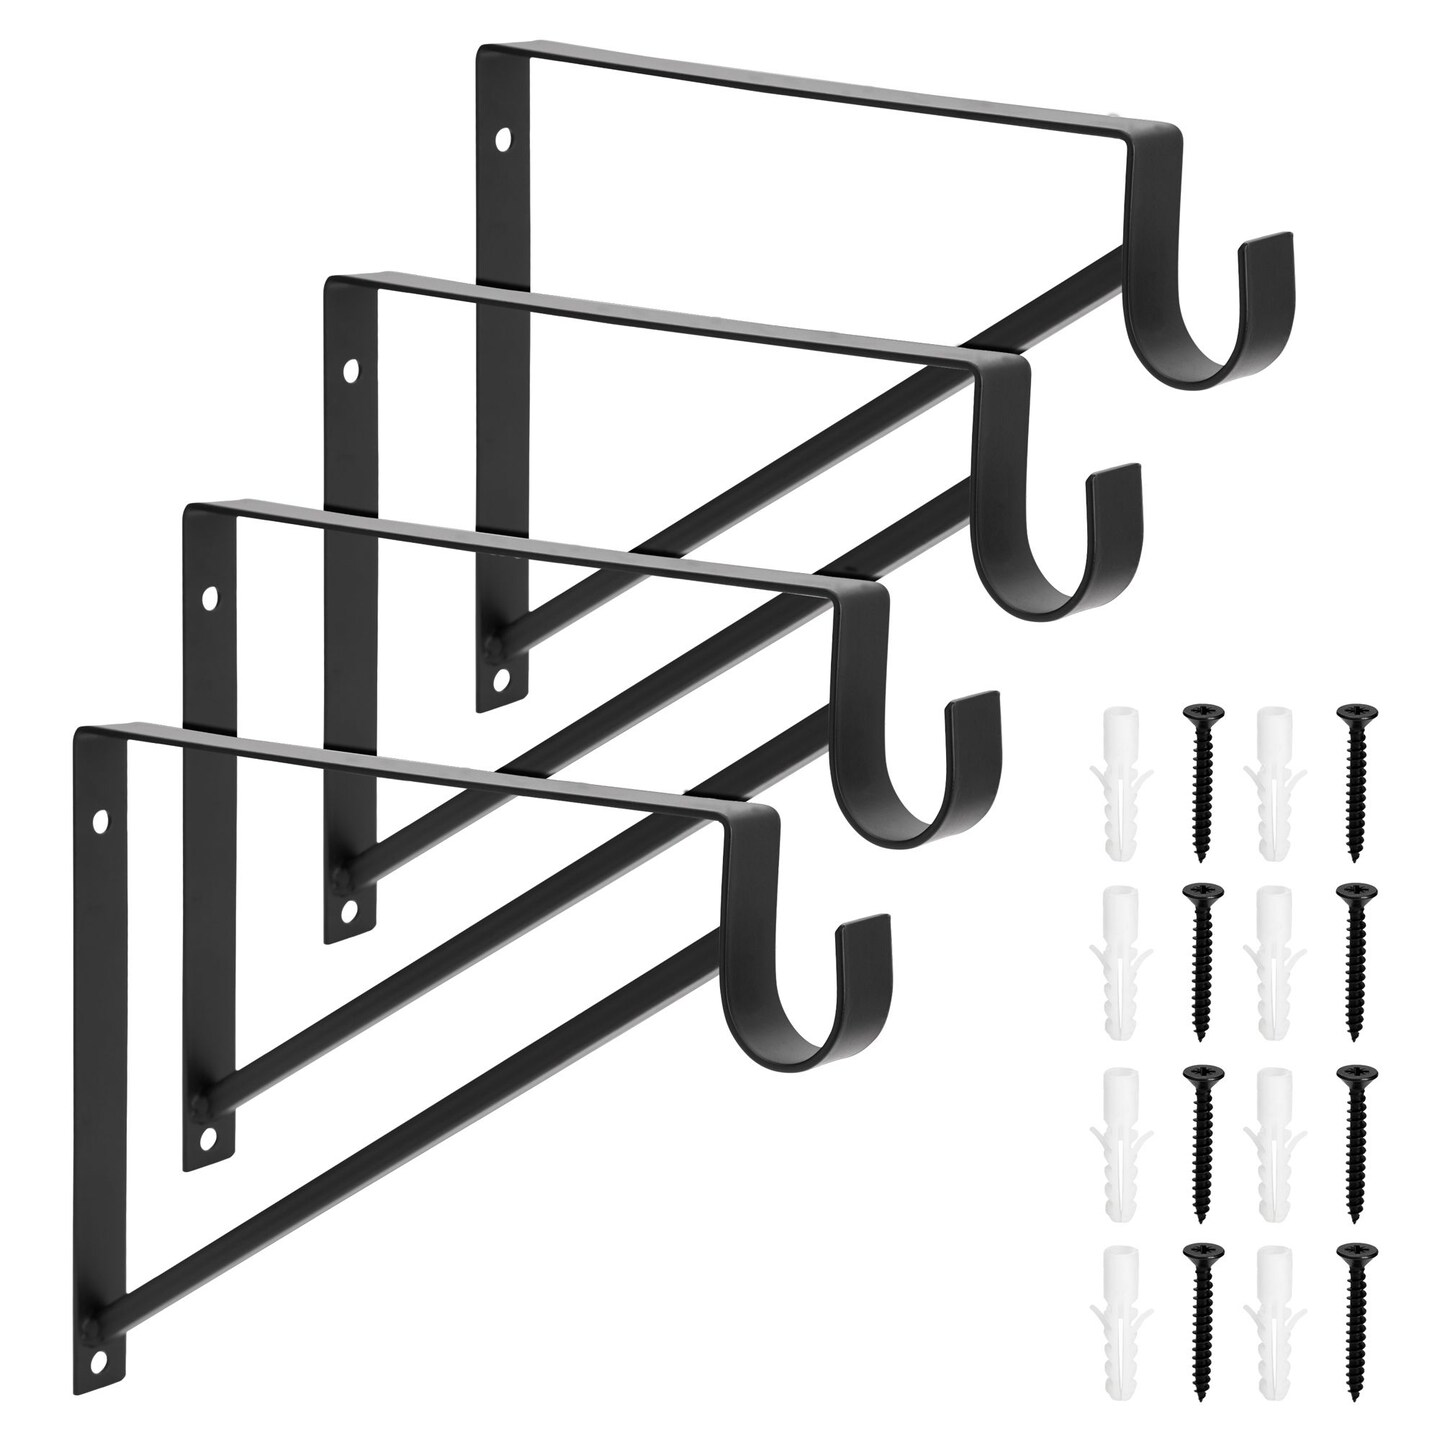 4 Pack Metal Closet Hanging Shelf Rod Bracket Holder and Support, Heavy Duty Bar for Shelving (Black, 12.5 x 1 x 9.5 in)